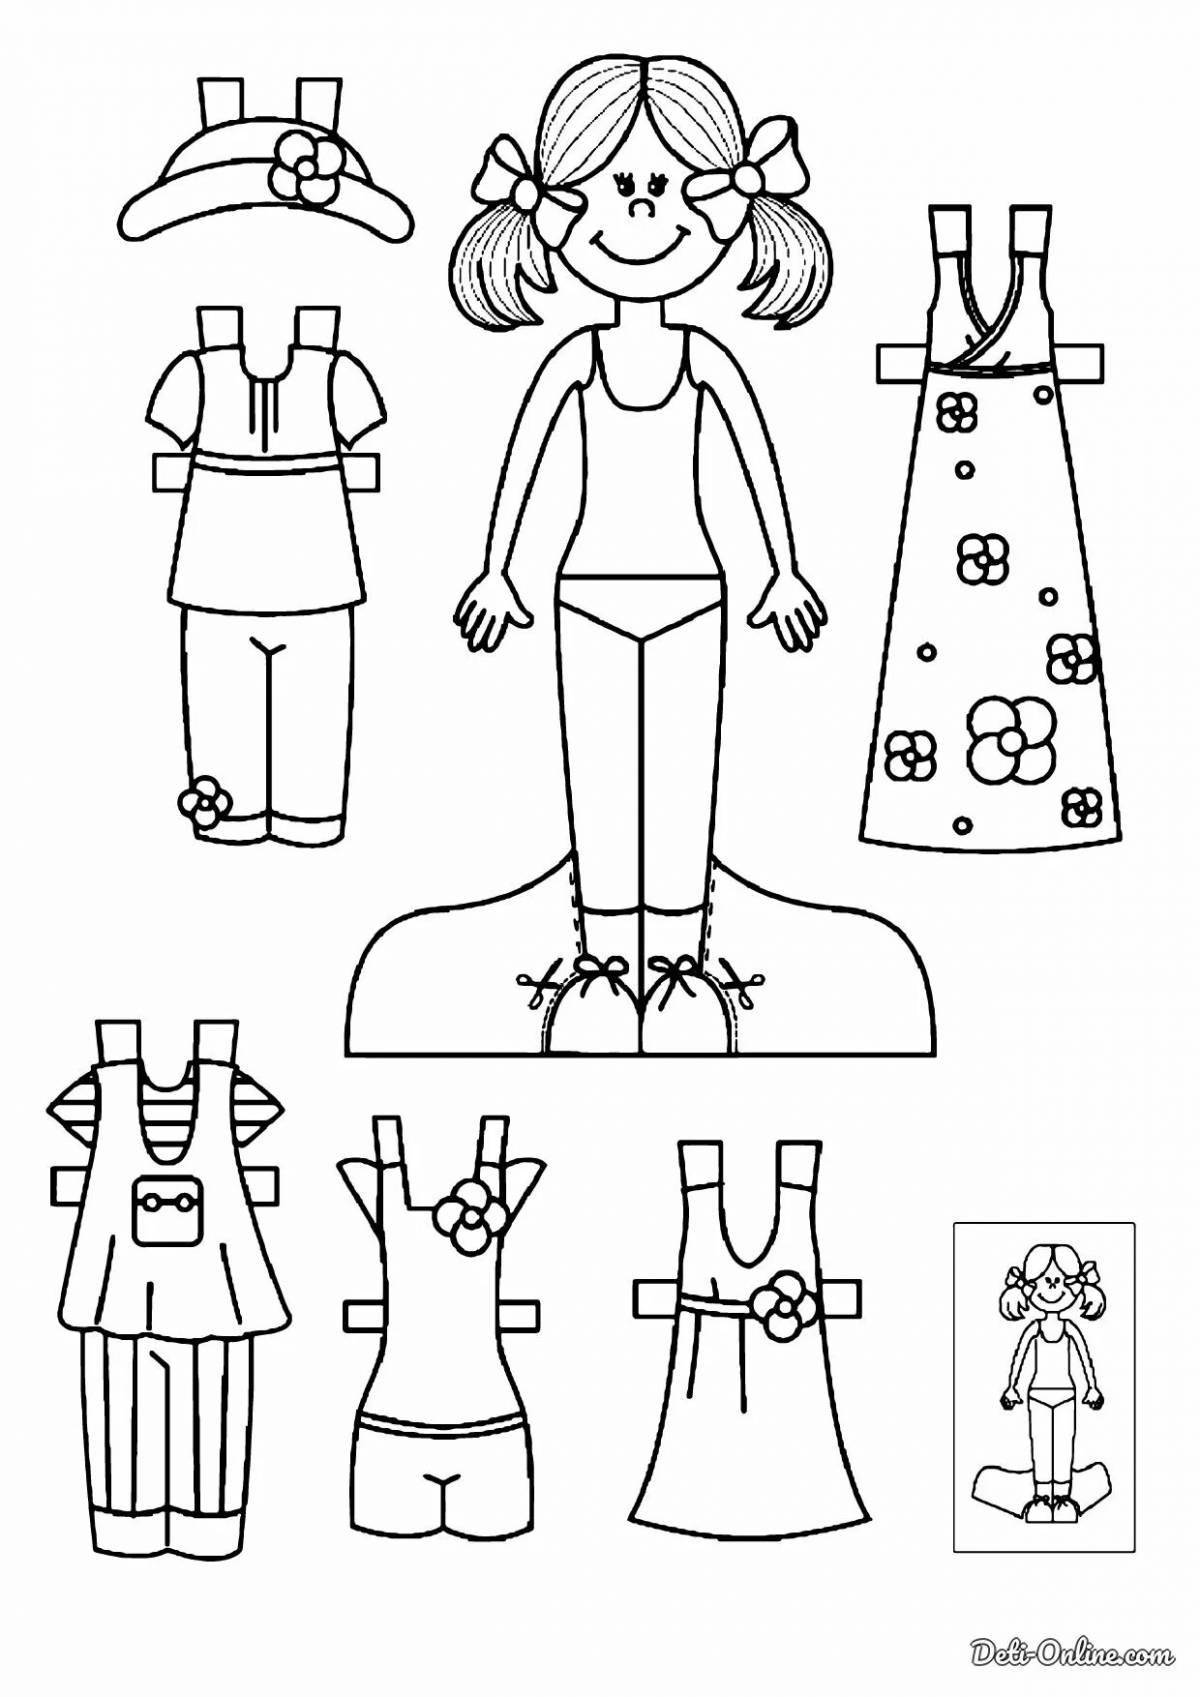 Adorable paper doll coloring page